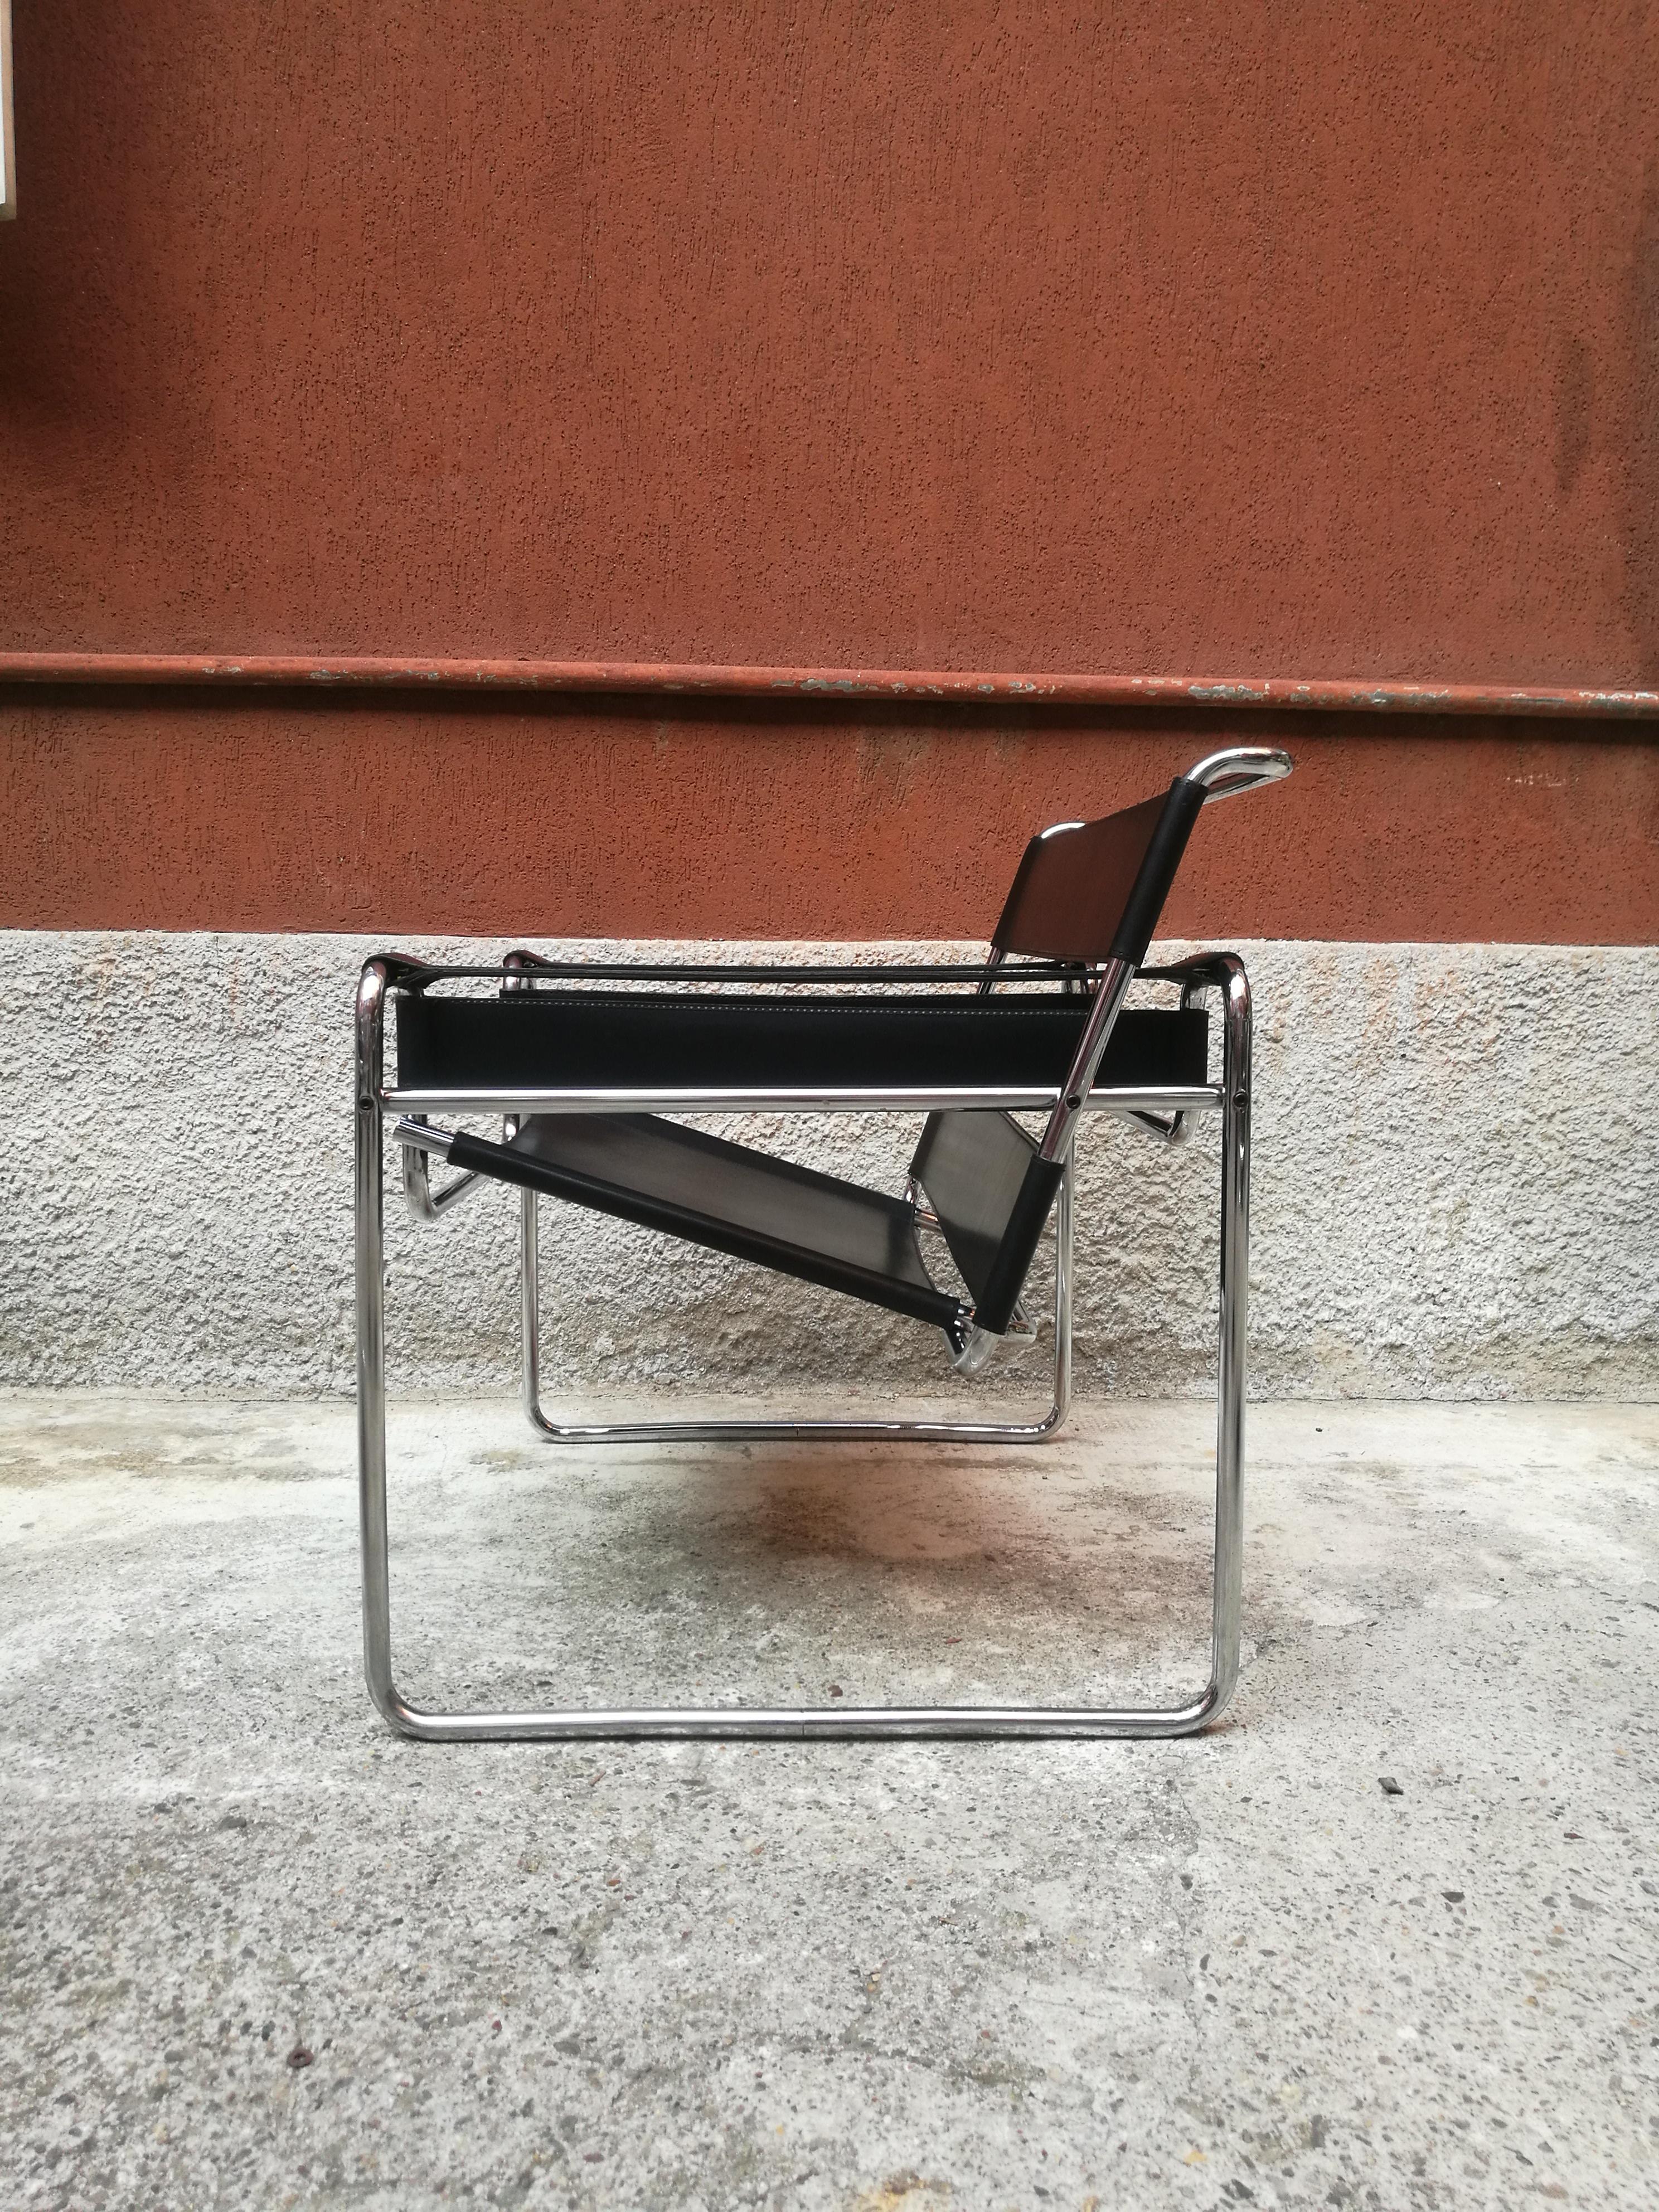 Black leather Wassily armchair by Marcel Breuer for Gavina, 1968
Mod.B3 armchair by Marcel Breuer, well known as Wassily, was designed in 1925.
This black leather version comes from seventies, from a house of architects and sculptors set in Milan,